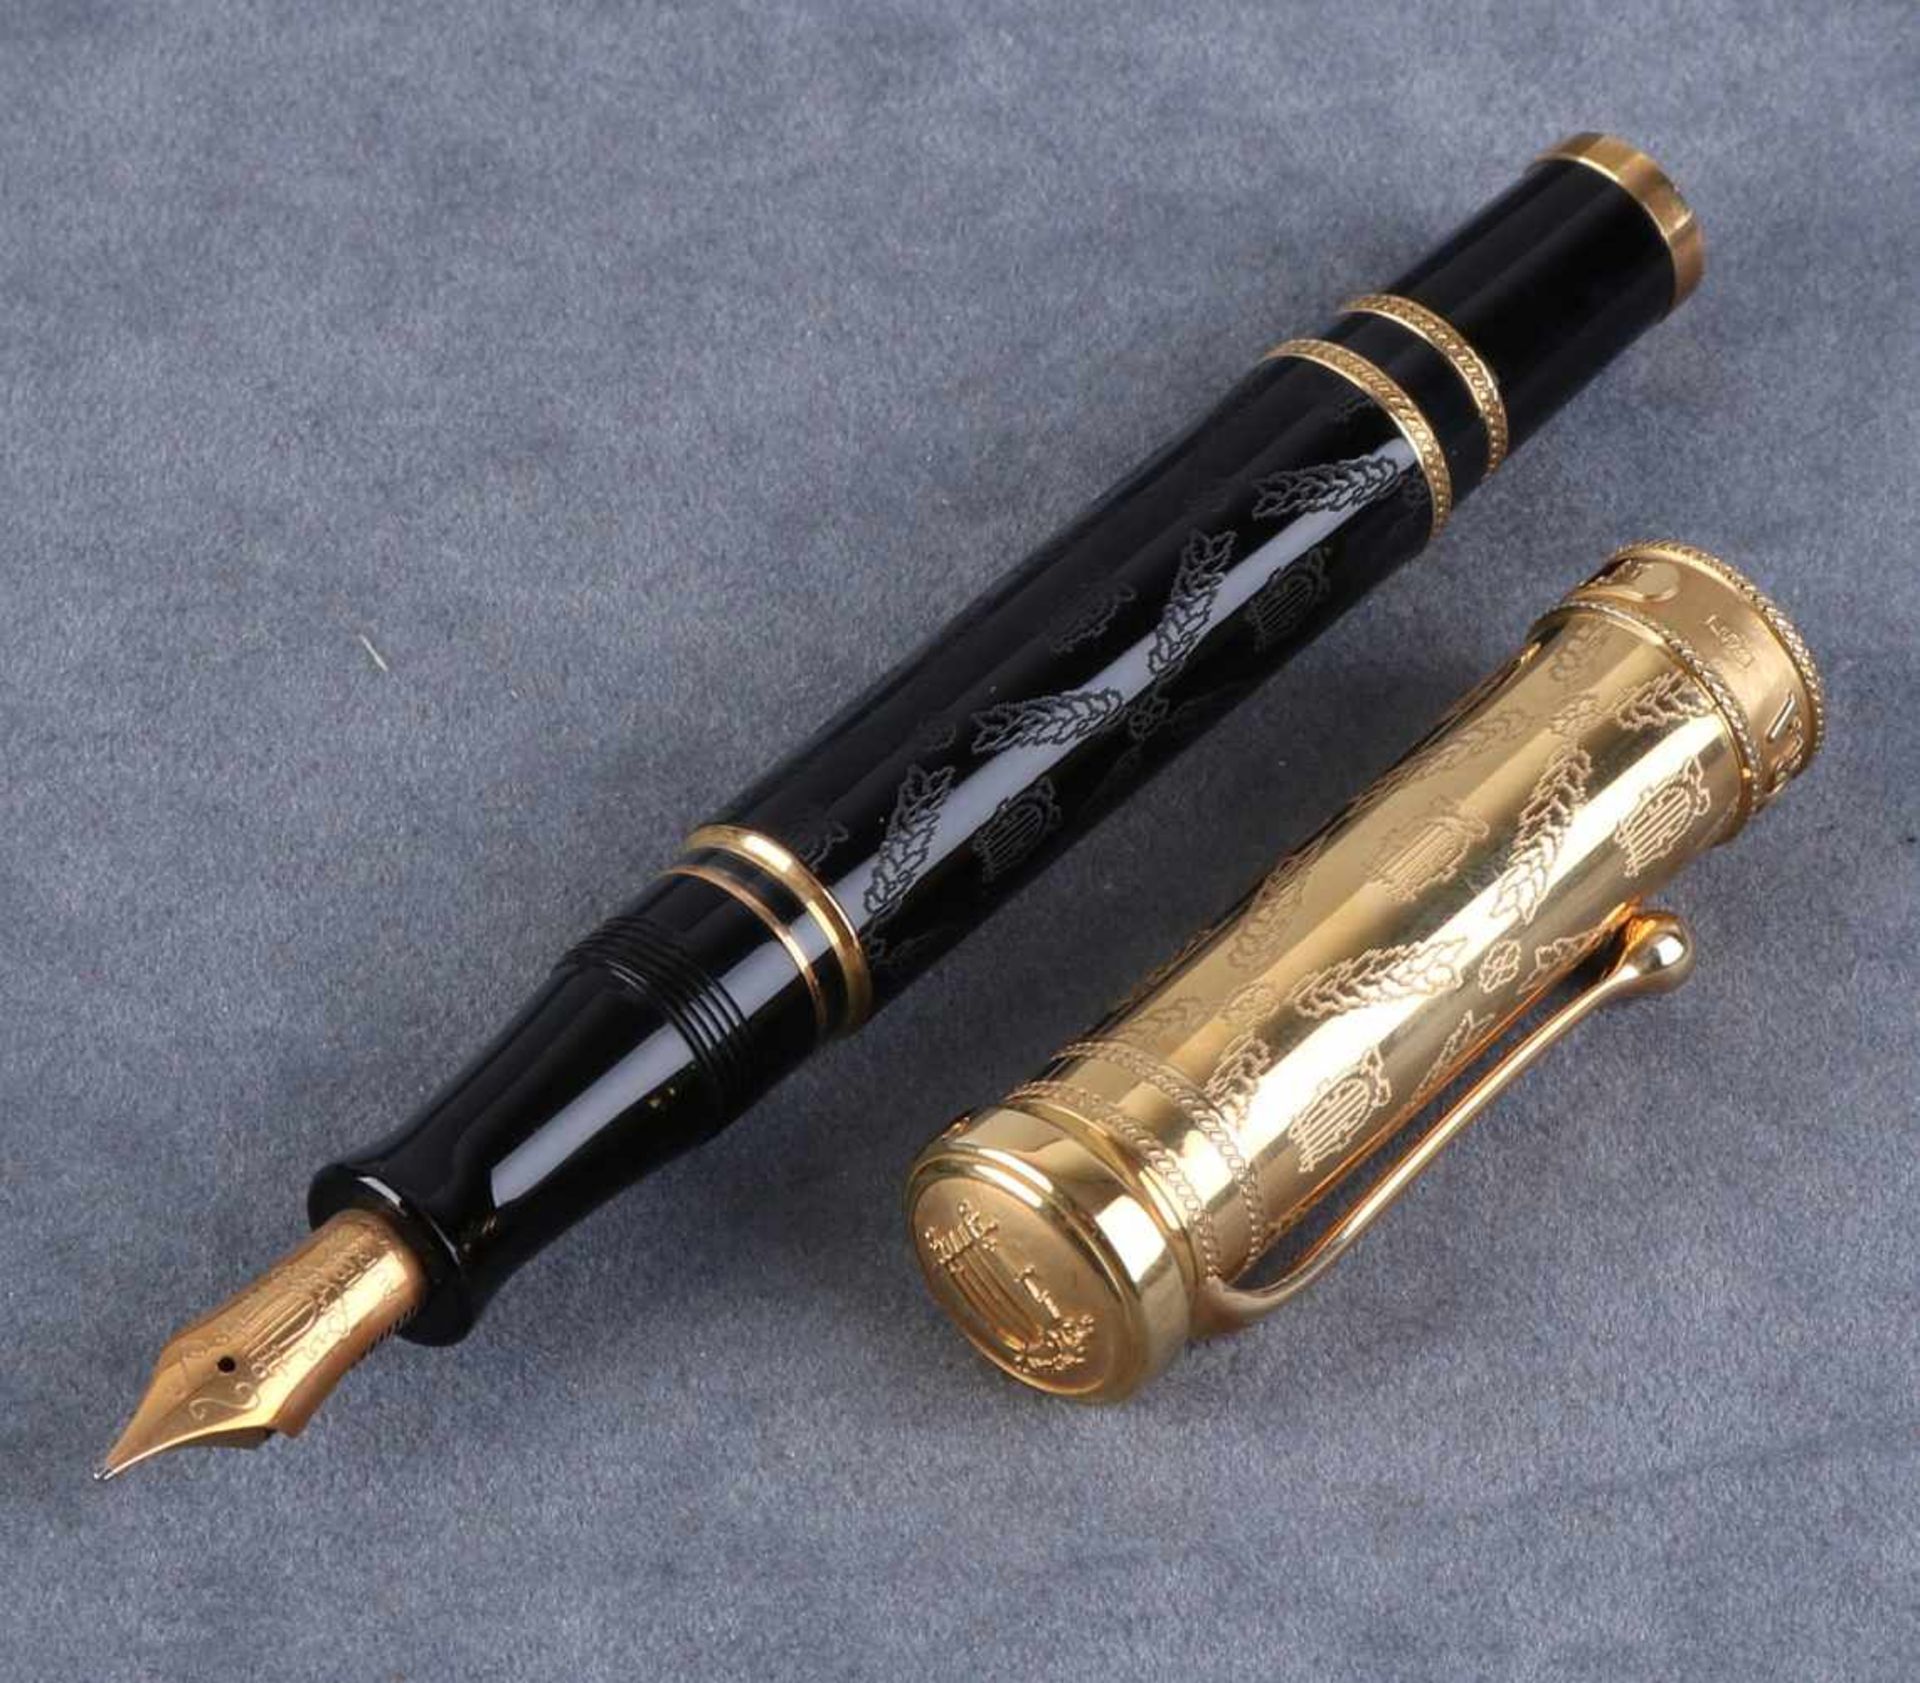 Very rare and exclusive Aurora pen Giuseppe Verdi Opera Gold ".  Nice pen, engraved all around and - Image 3 of 3